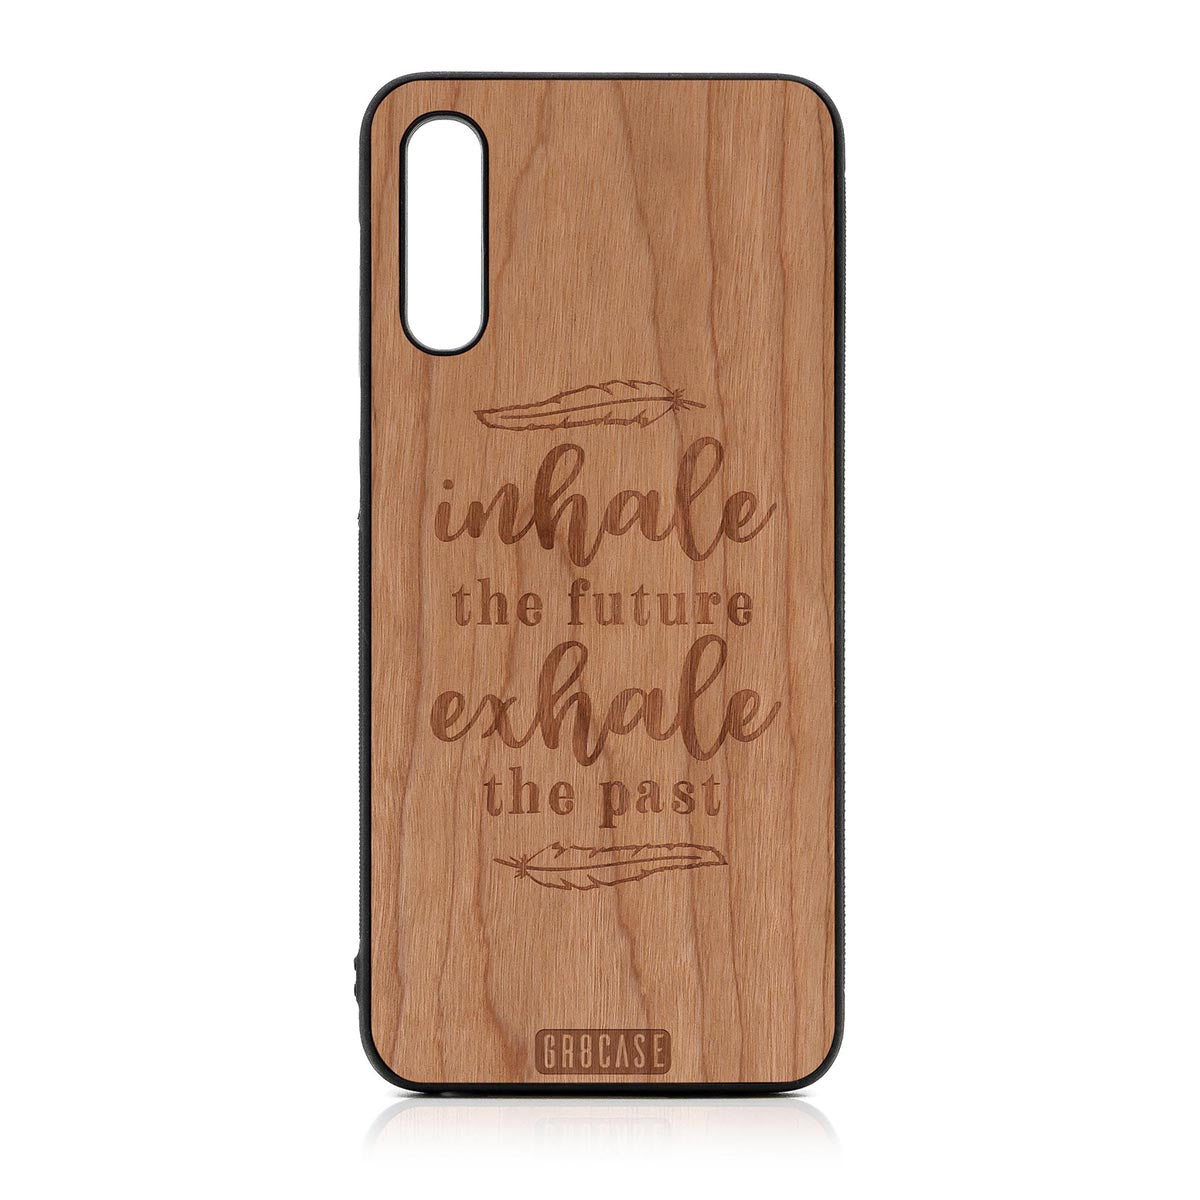 Inhale The Future Exhale The Past Design Wood Case For Samsung Galaxy A50 by GR8CASE